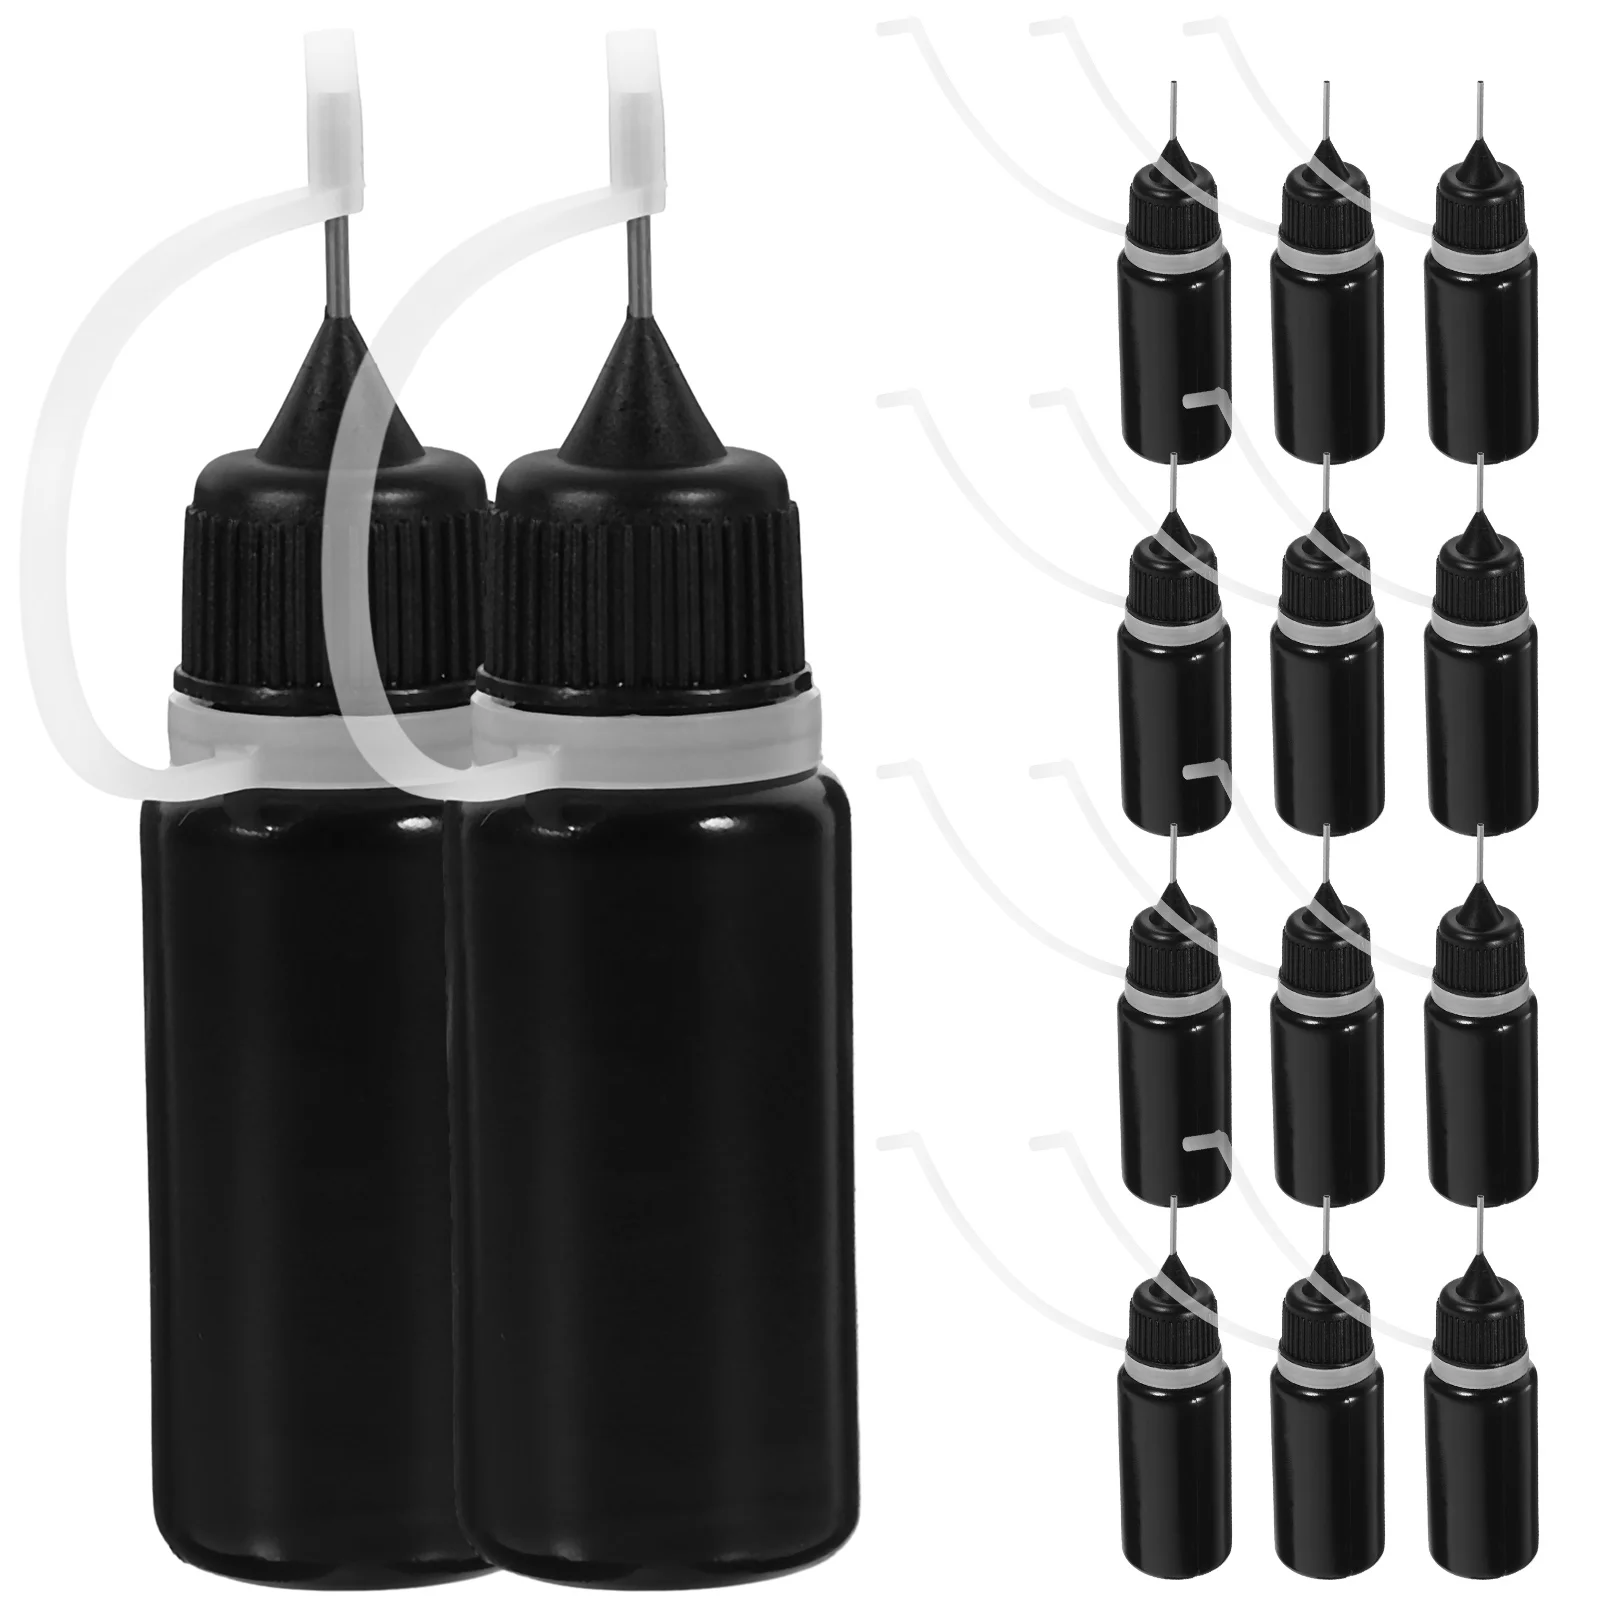 20 Pcs Bottled Squeeze Bottles Glue with Fine Tip for Liquids Needle Small Stainless Steel Precision Applicator Dispenser 12 9 grade carbon steel hex socket cup point head set screw paint treatment anti loose spot blue glue grub screw1180